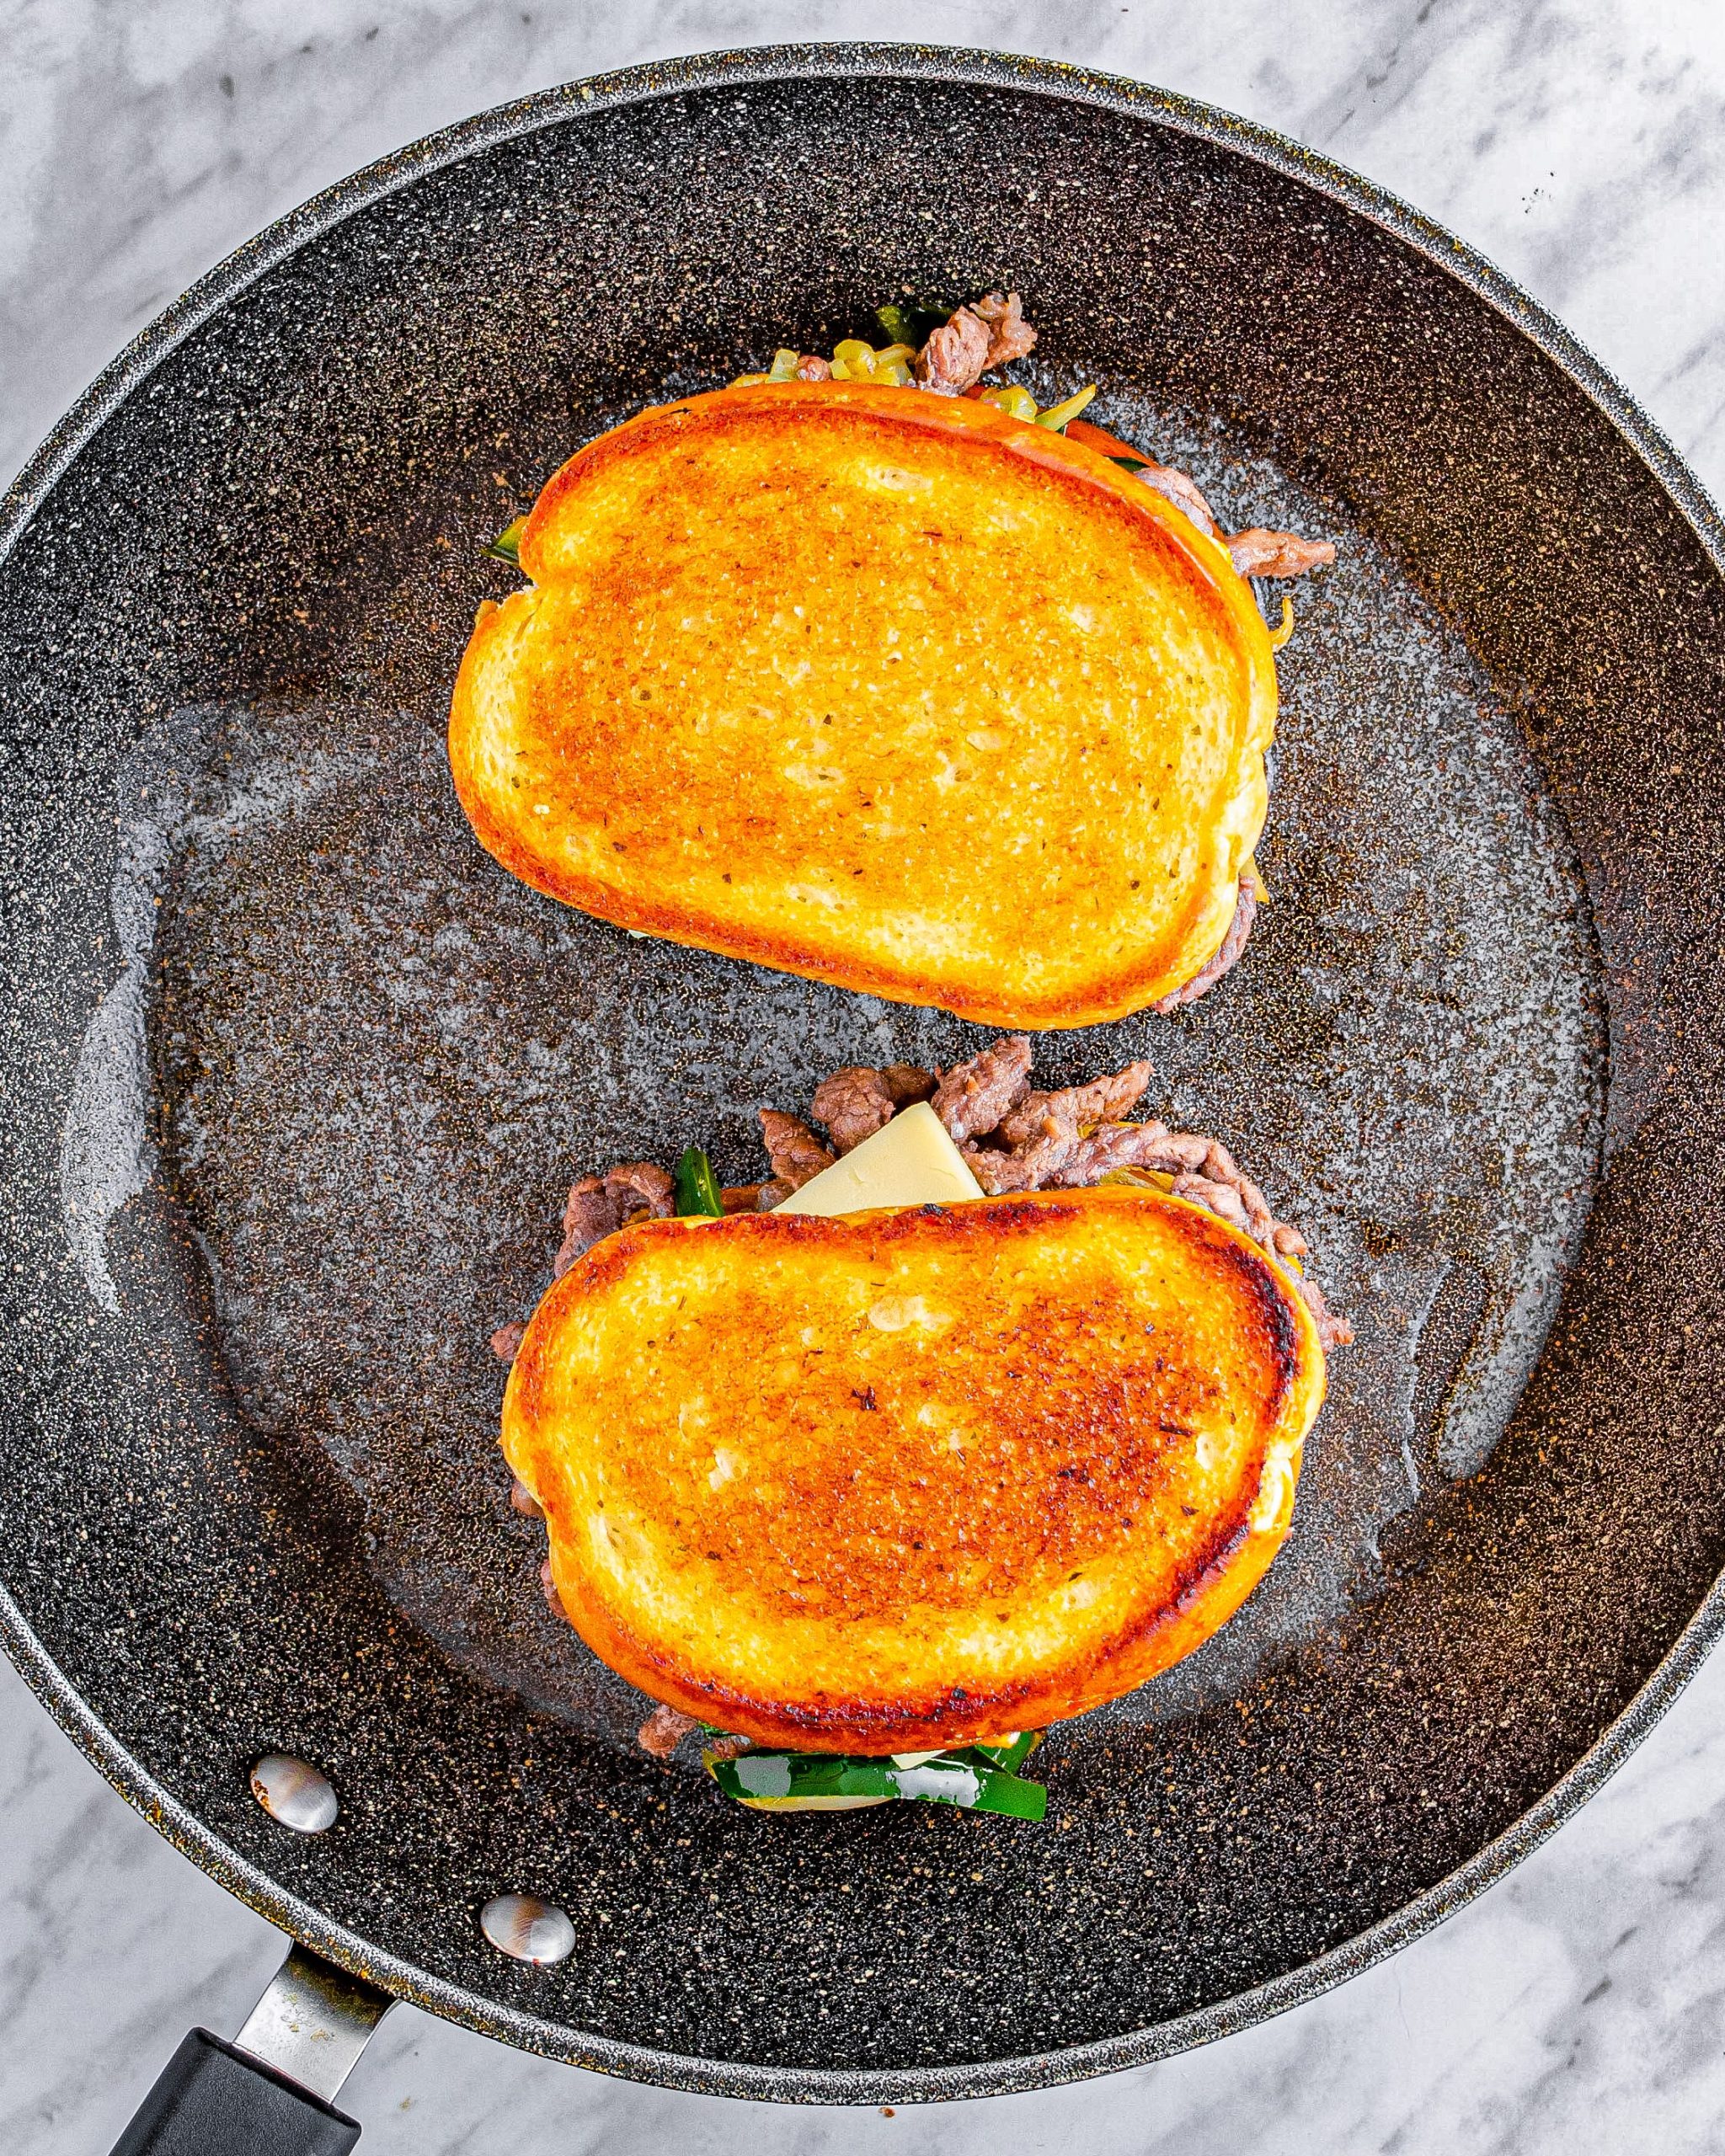 Place the sandwiches into the skillet, cooking for several minutes on top until the bread is toasted and the cheese has melted.